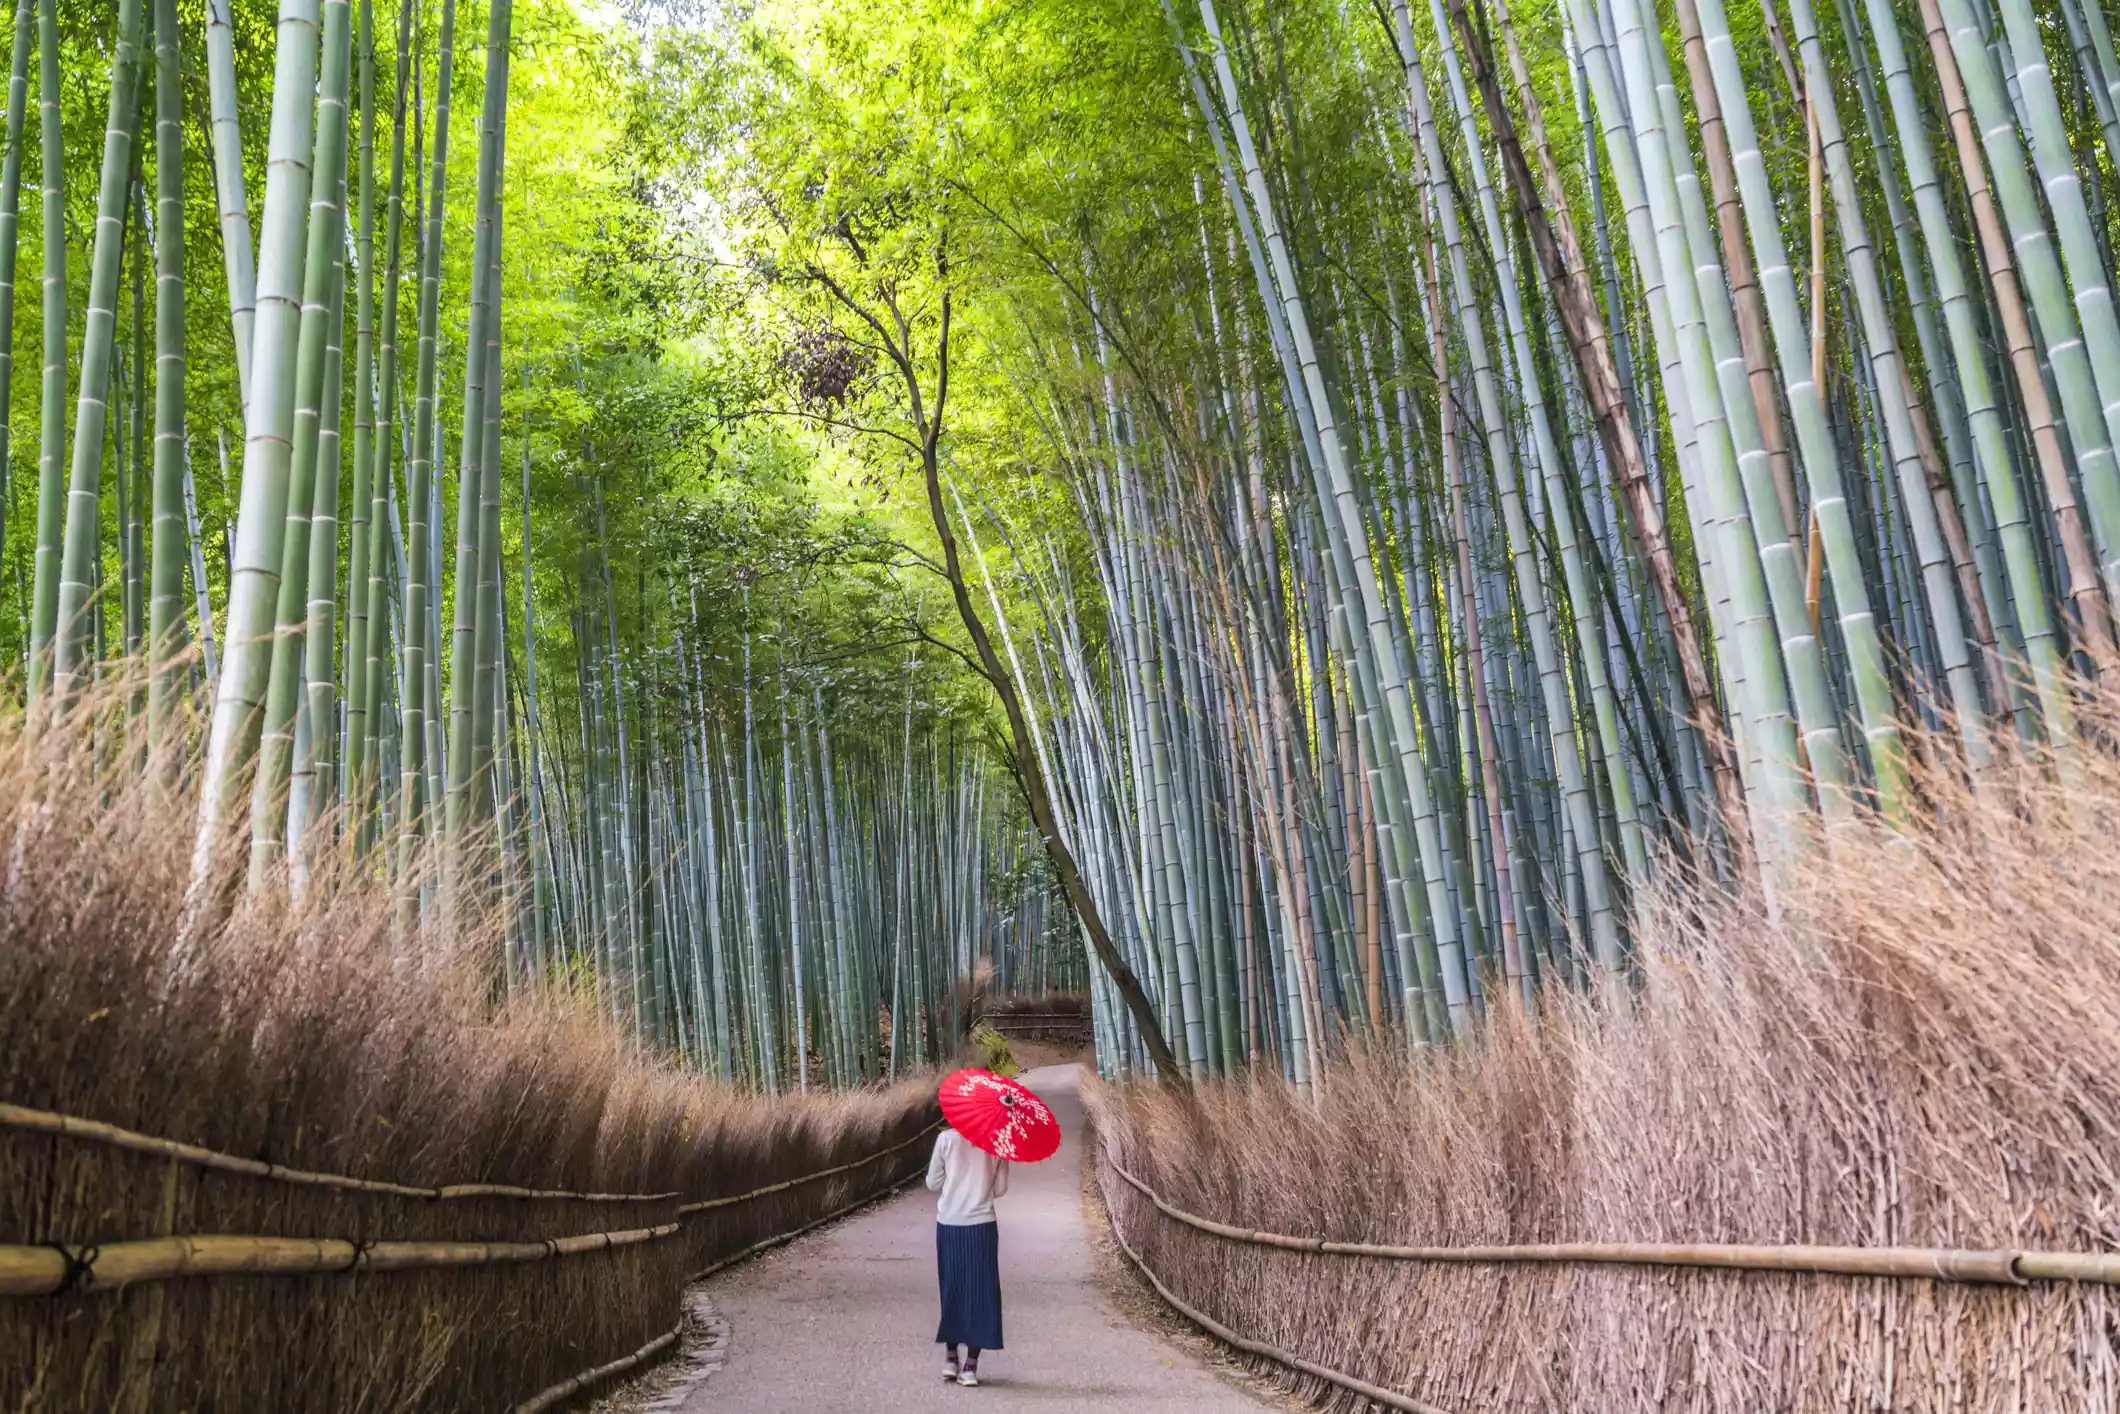 Person with umbrella walking on path through bamboo forest